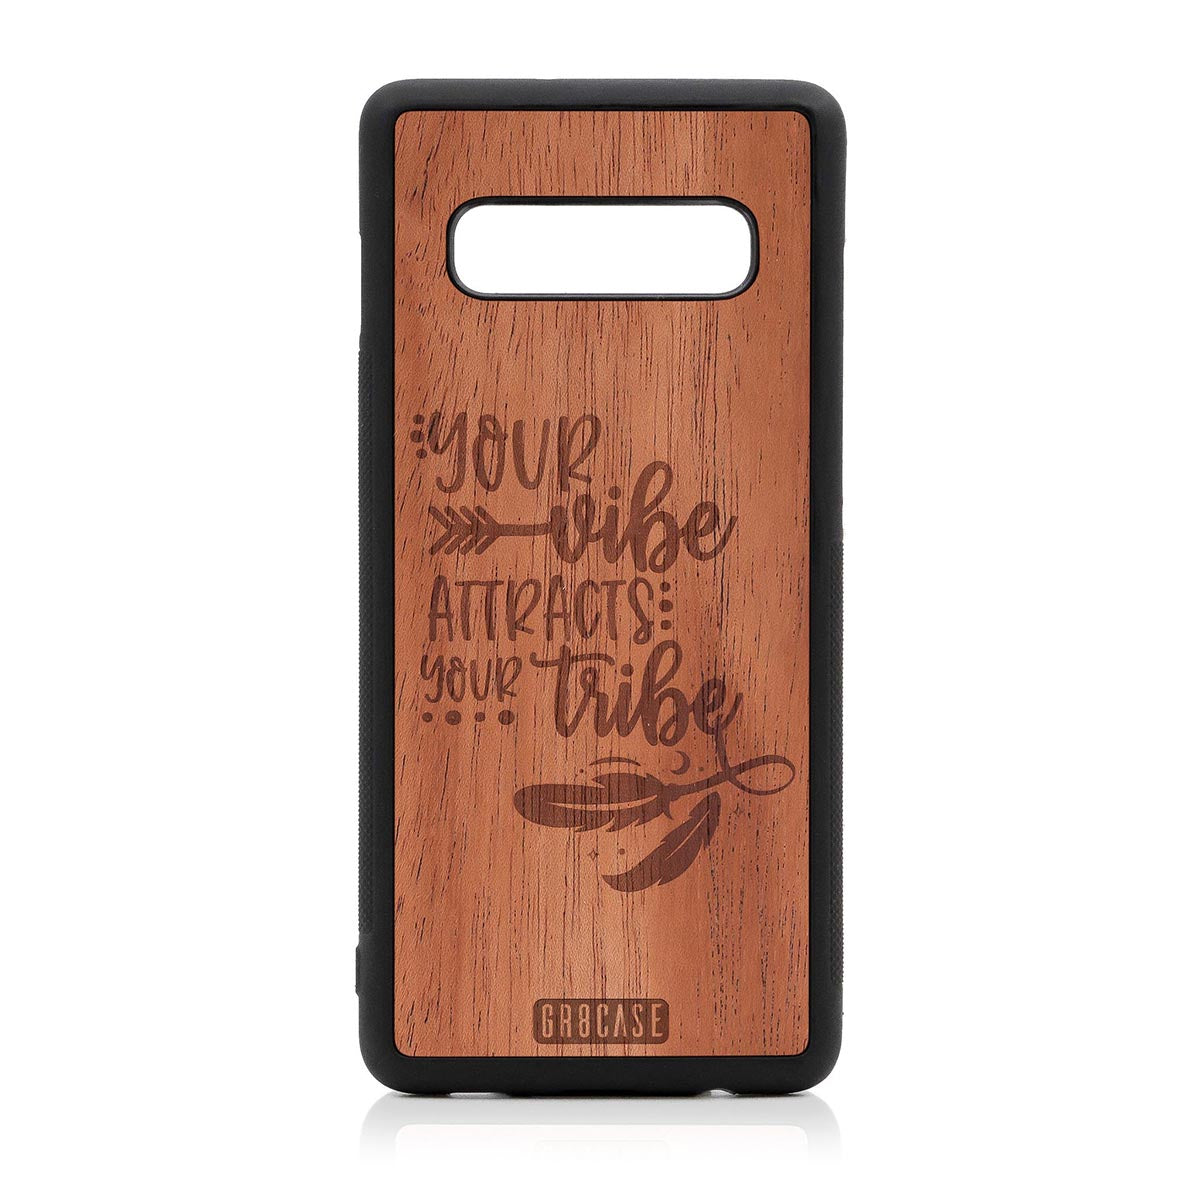 Your Vibe Attracts Your Tribe Design Wood Case Samsung Galaxy S10 Plus